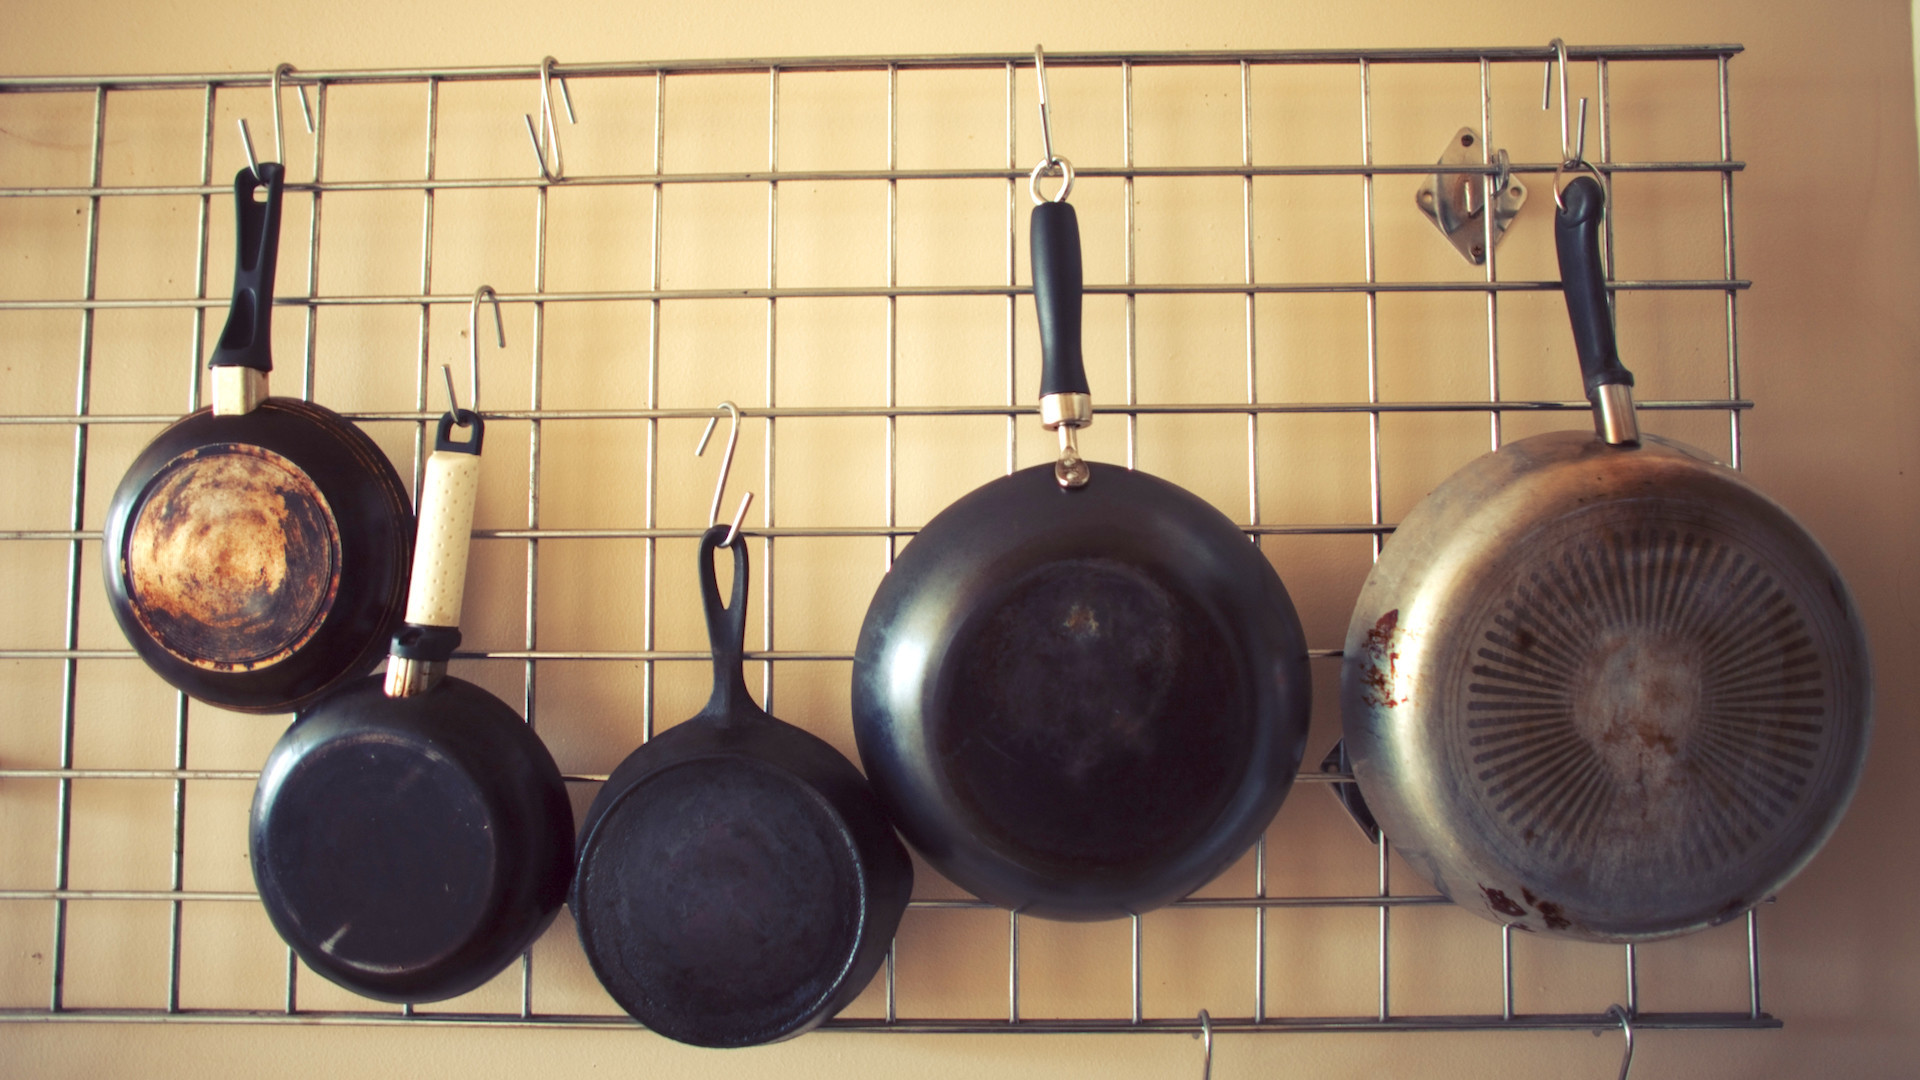 DIY Pots And Pans Rack
 12 DIY pot rack projects to save space in your kitchen